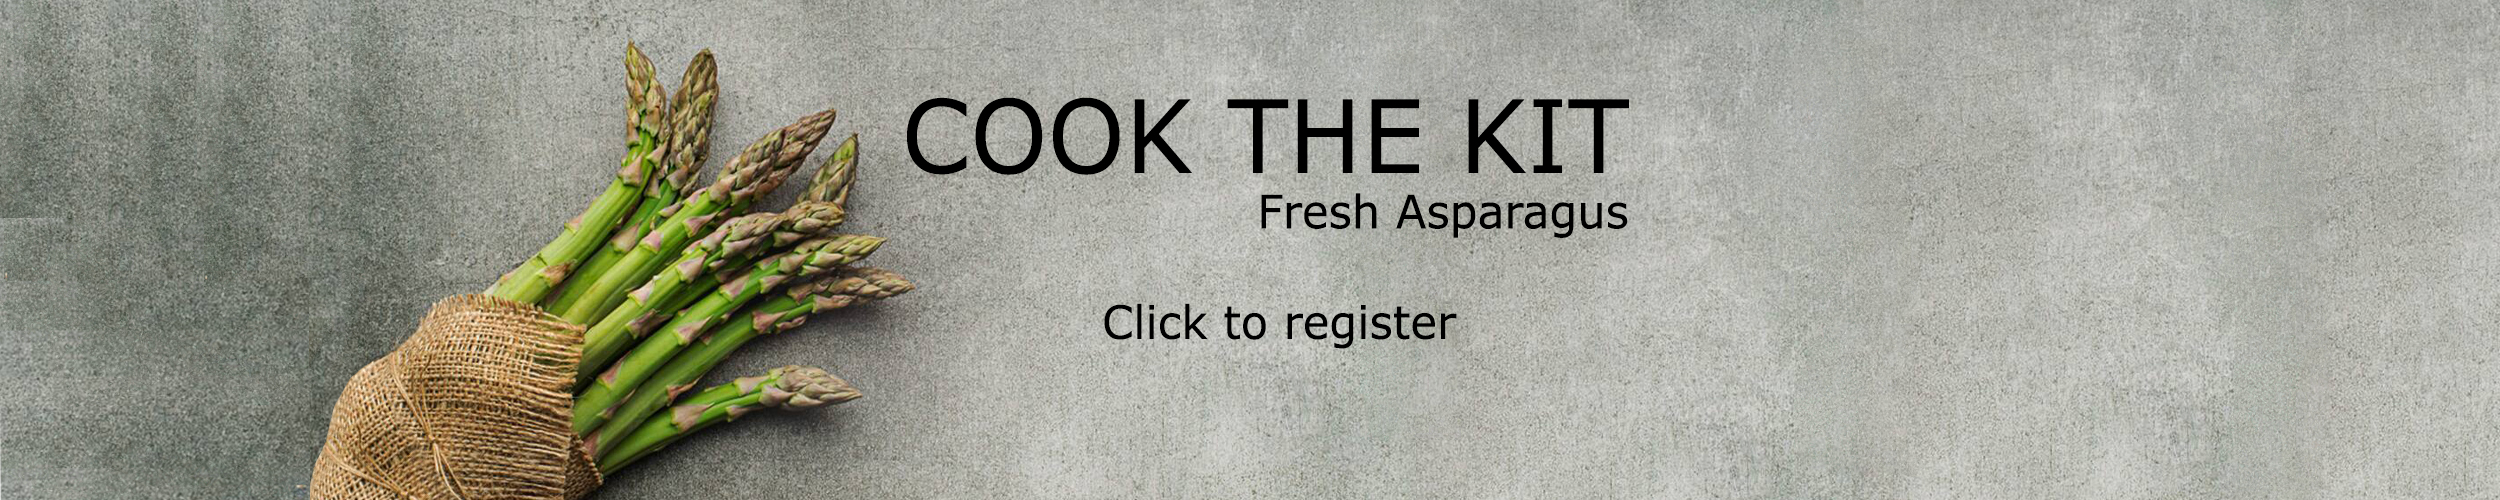 Bag of asparagus "Cook the Kit click to register"